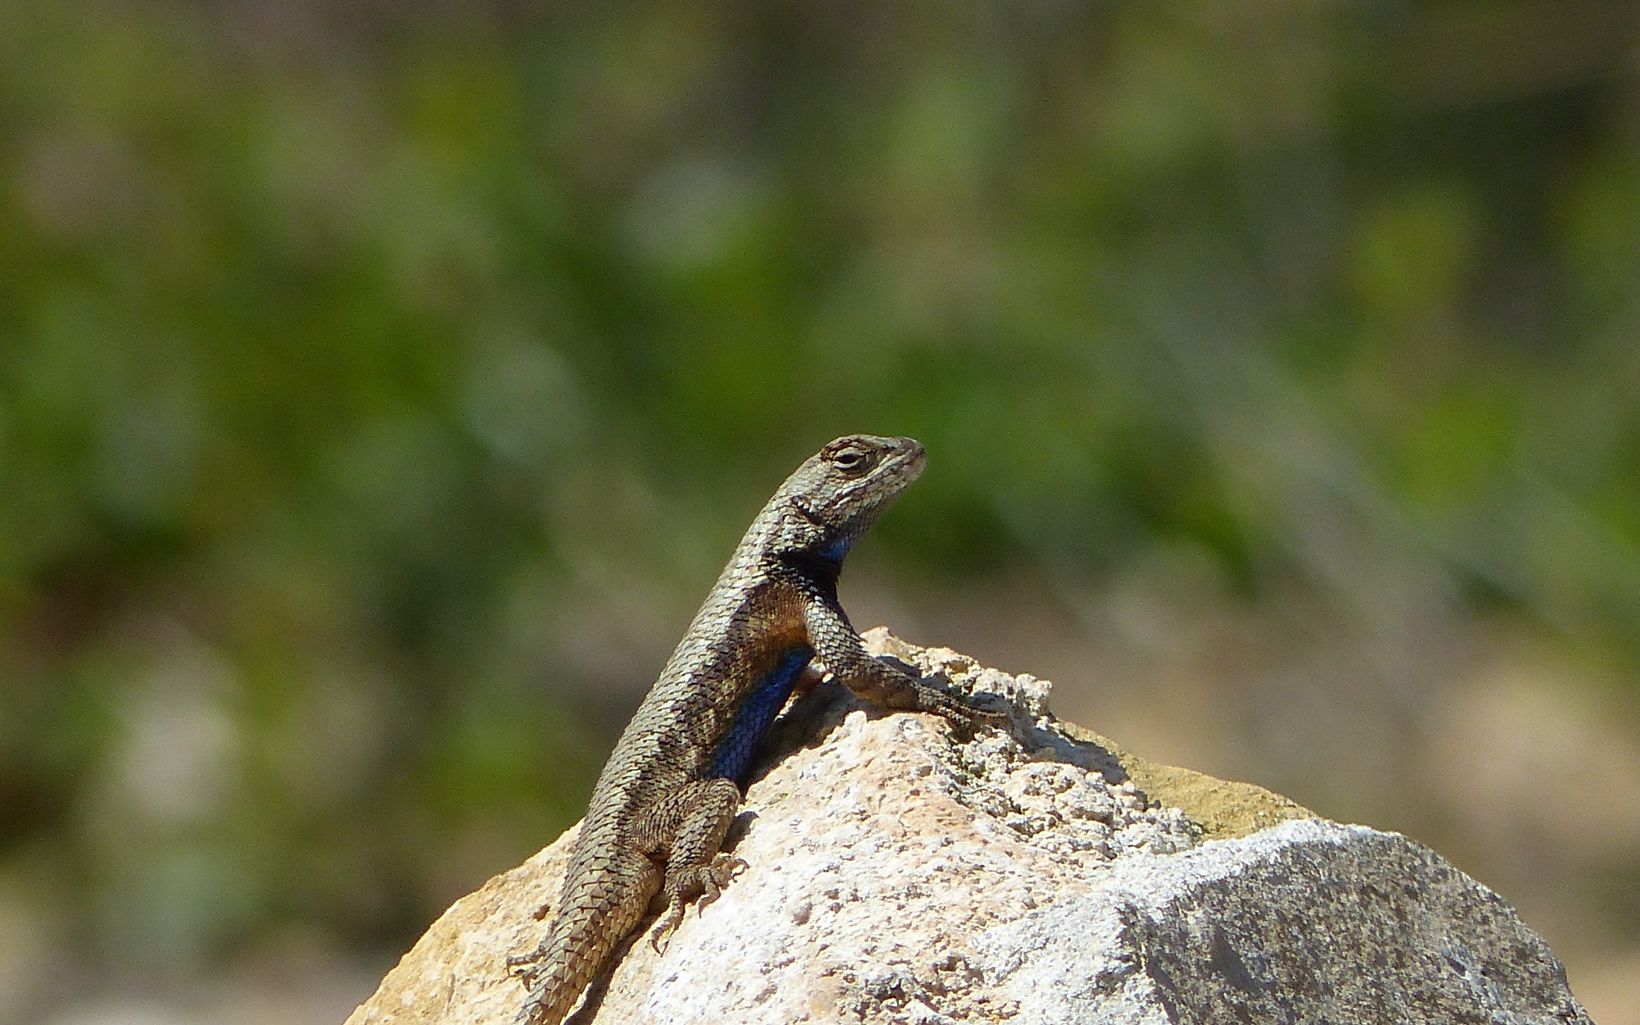 A lizard perched on a rock.